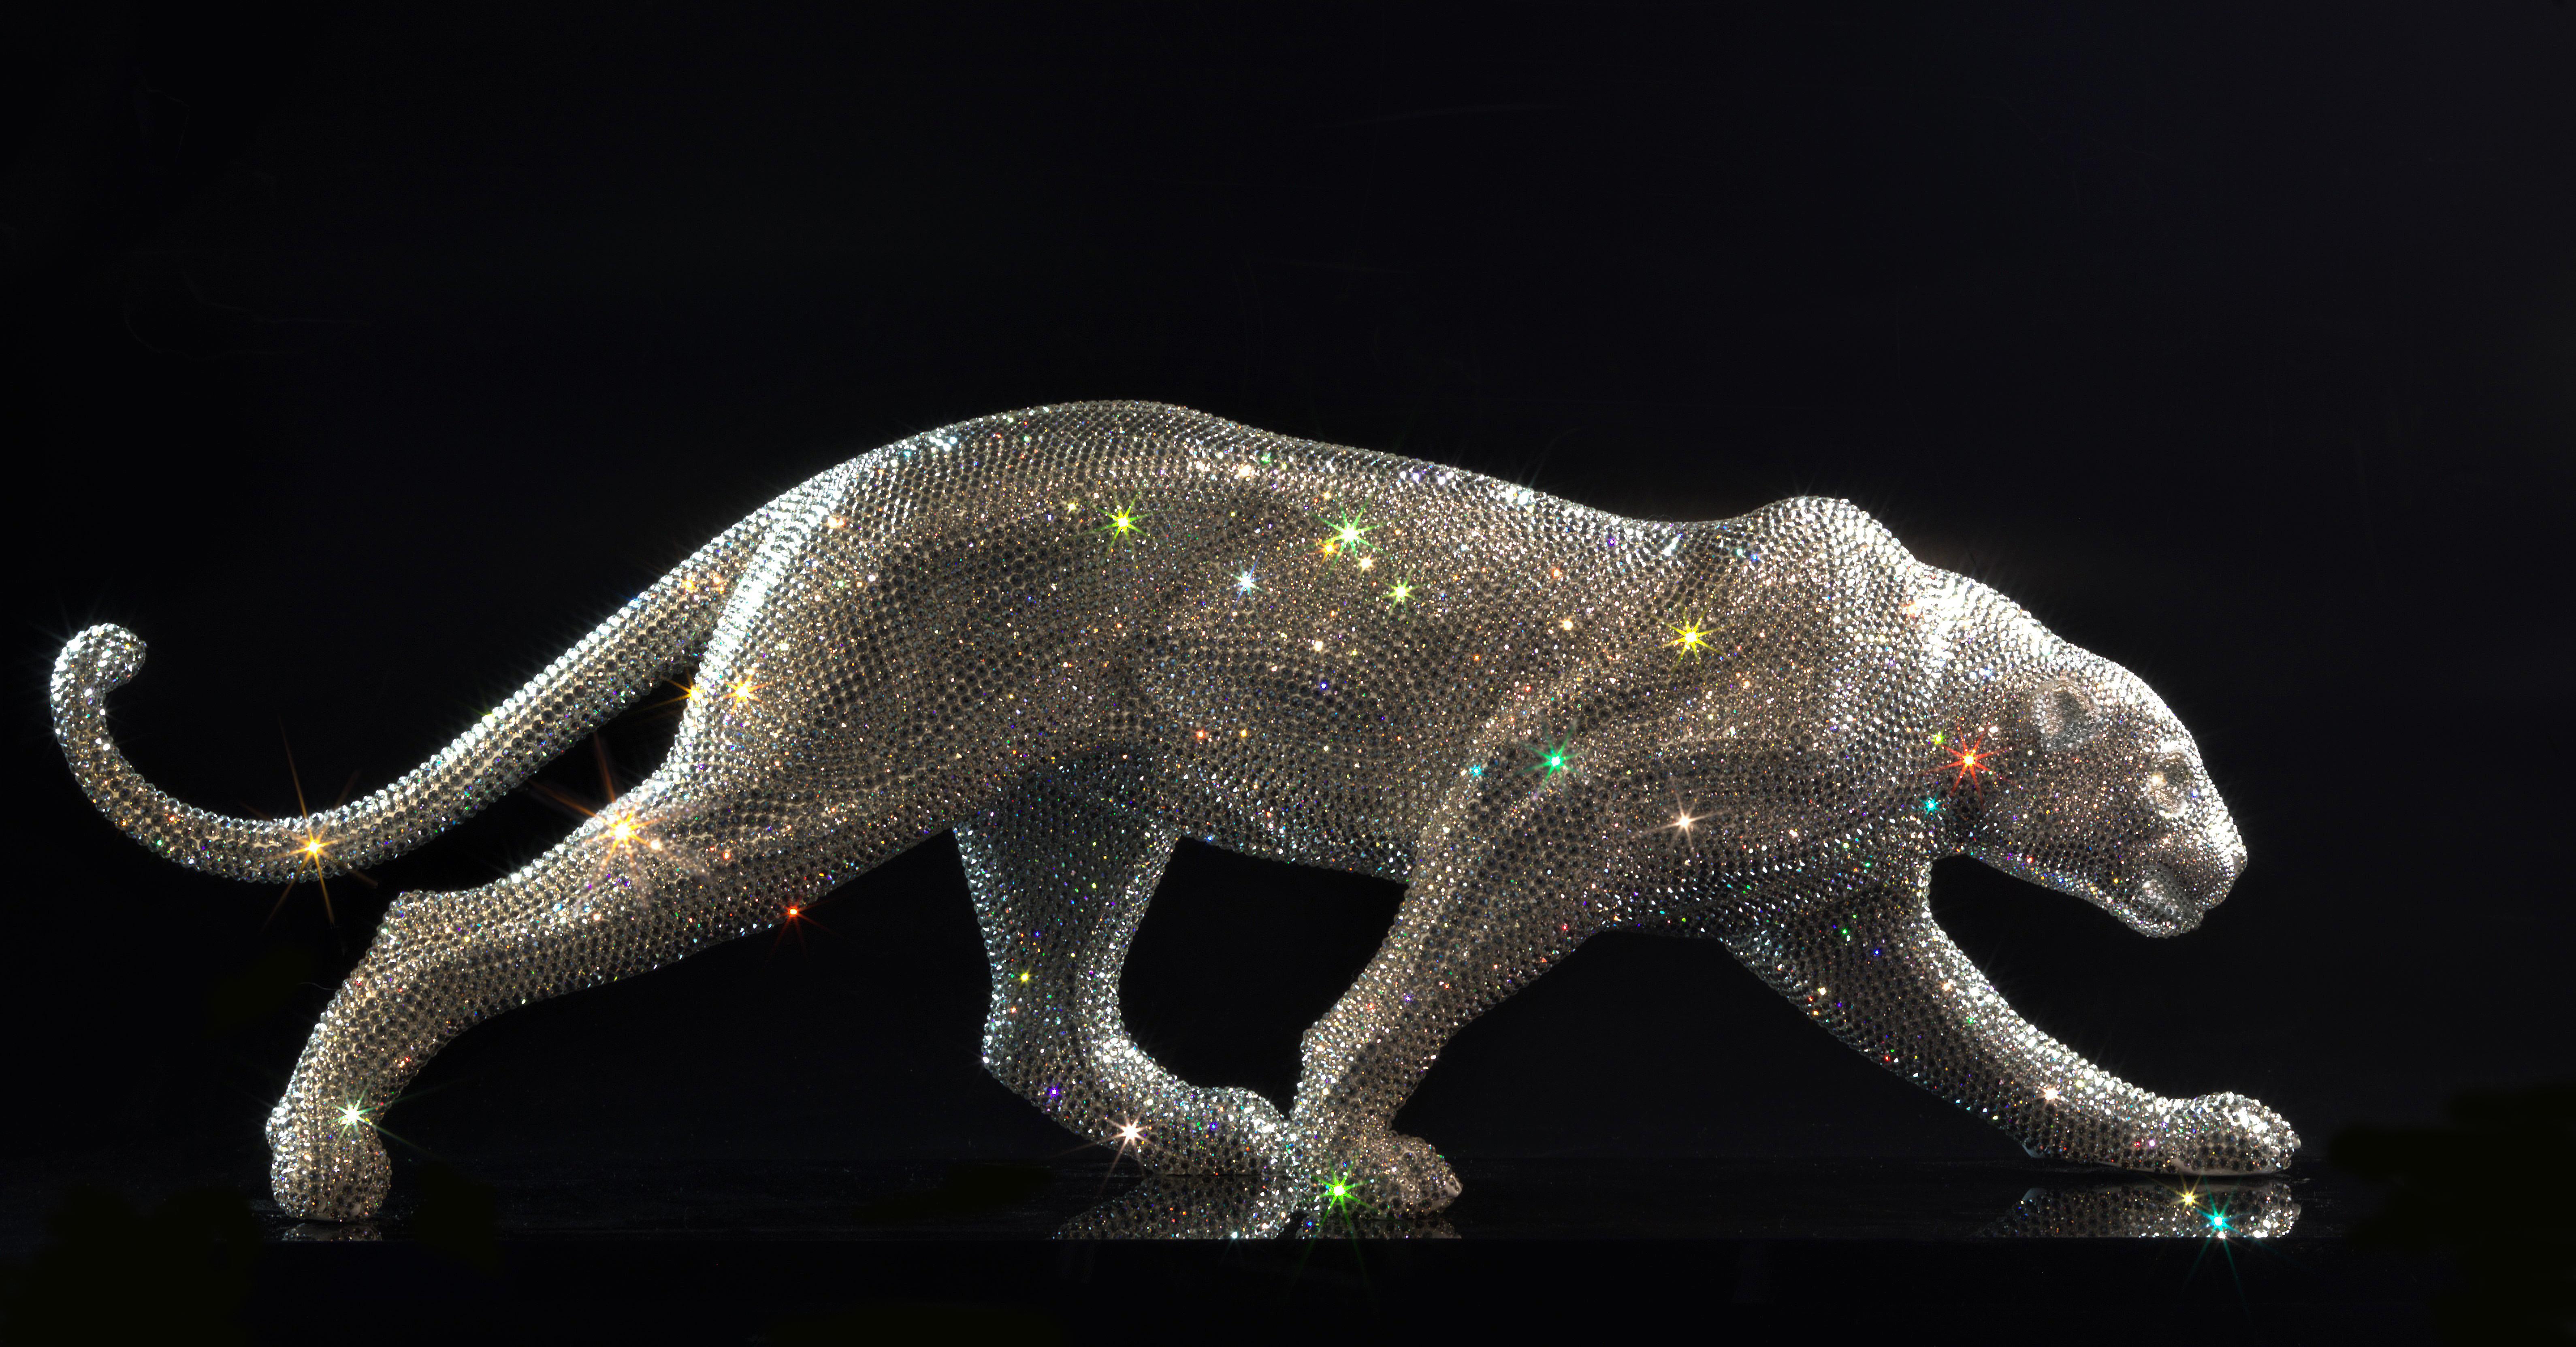 Ives Pires Figurative Sculpture - Cheetah covered with Swarovski crystals